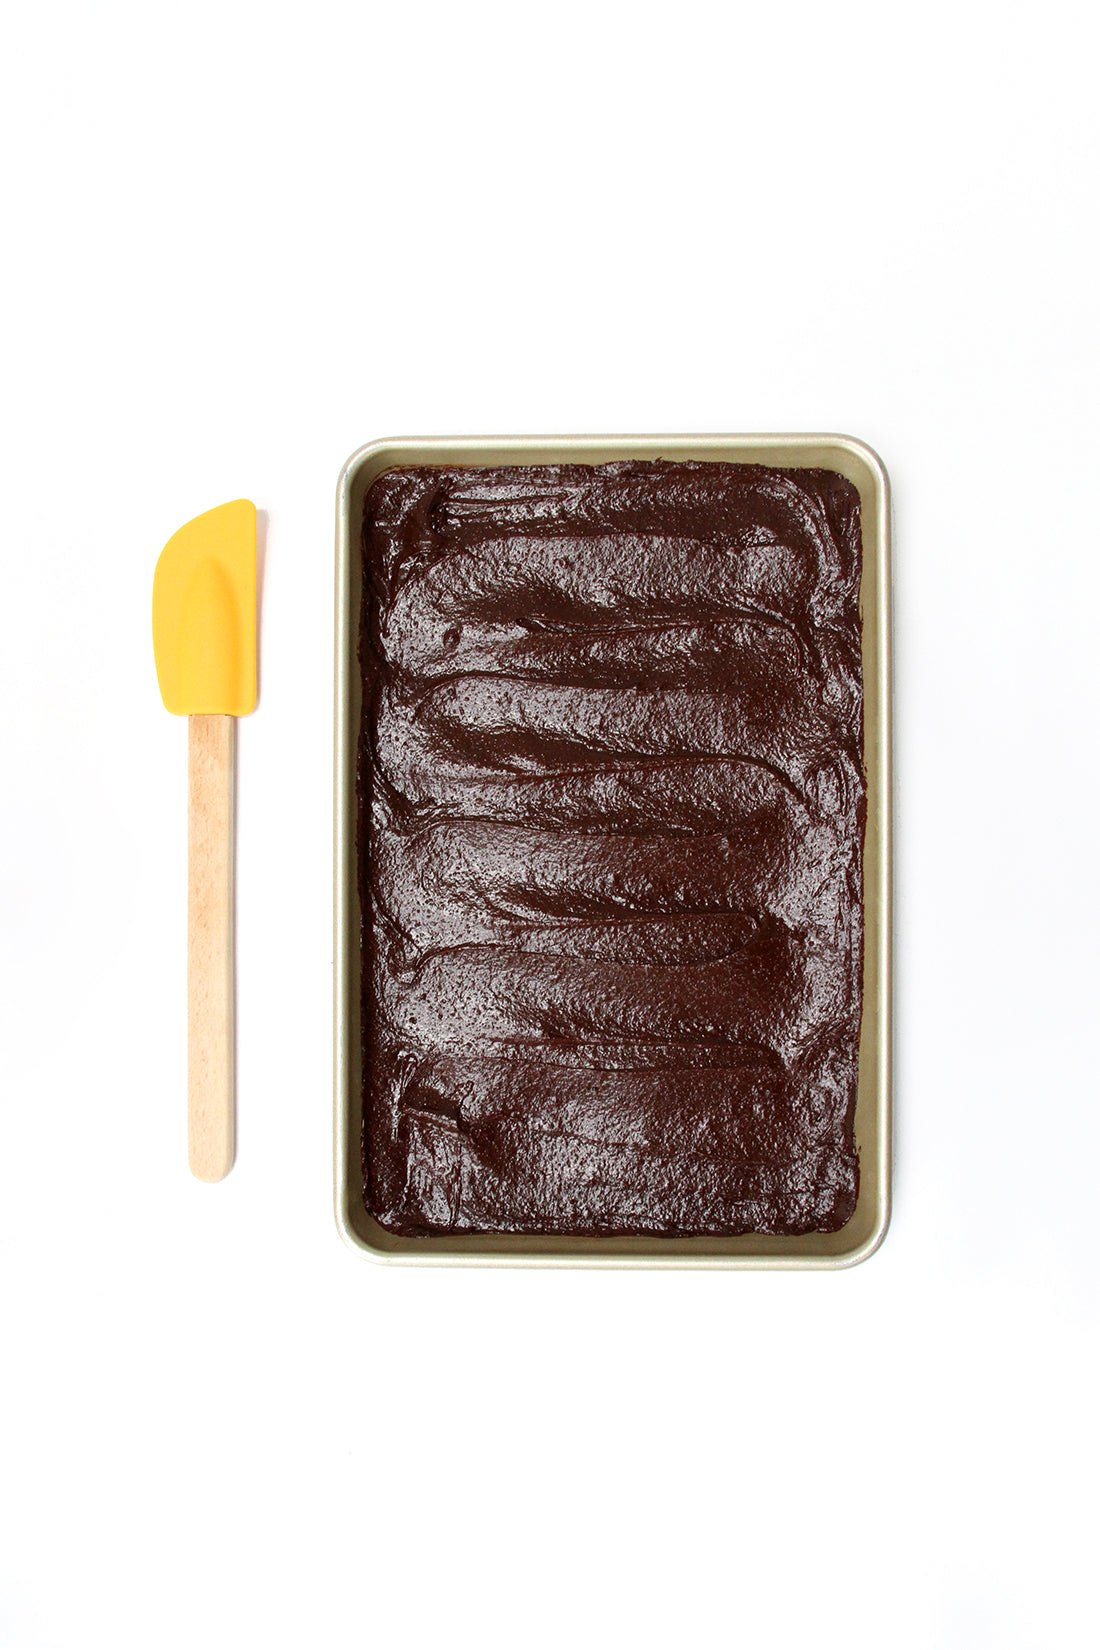 Image from above of brownie batter on a baking sheet next to a yellow spatula used for Miss Jones Baking Co Coffee Break Shake